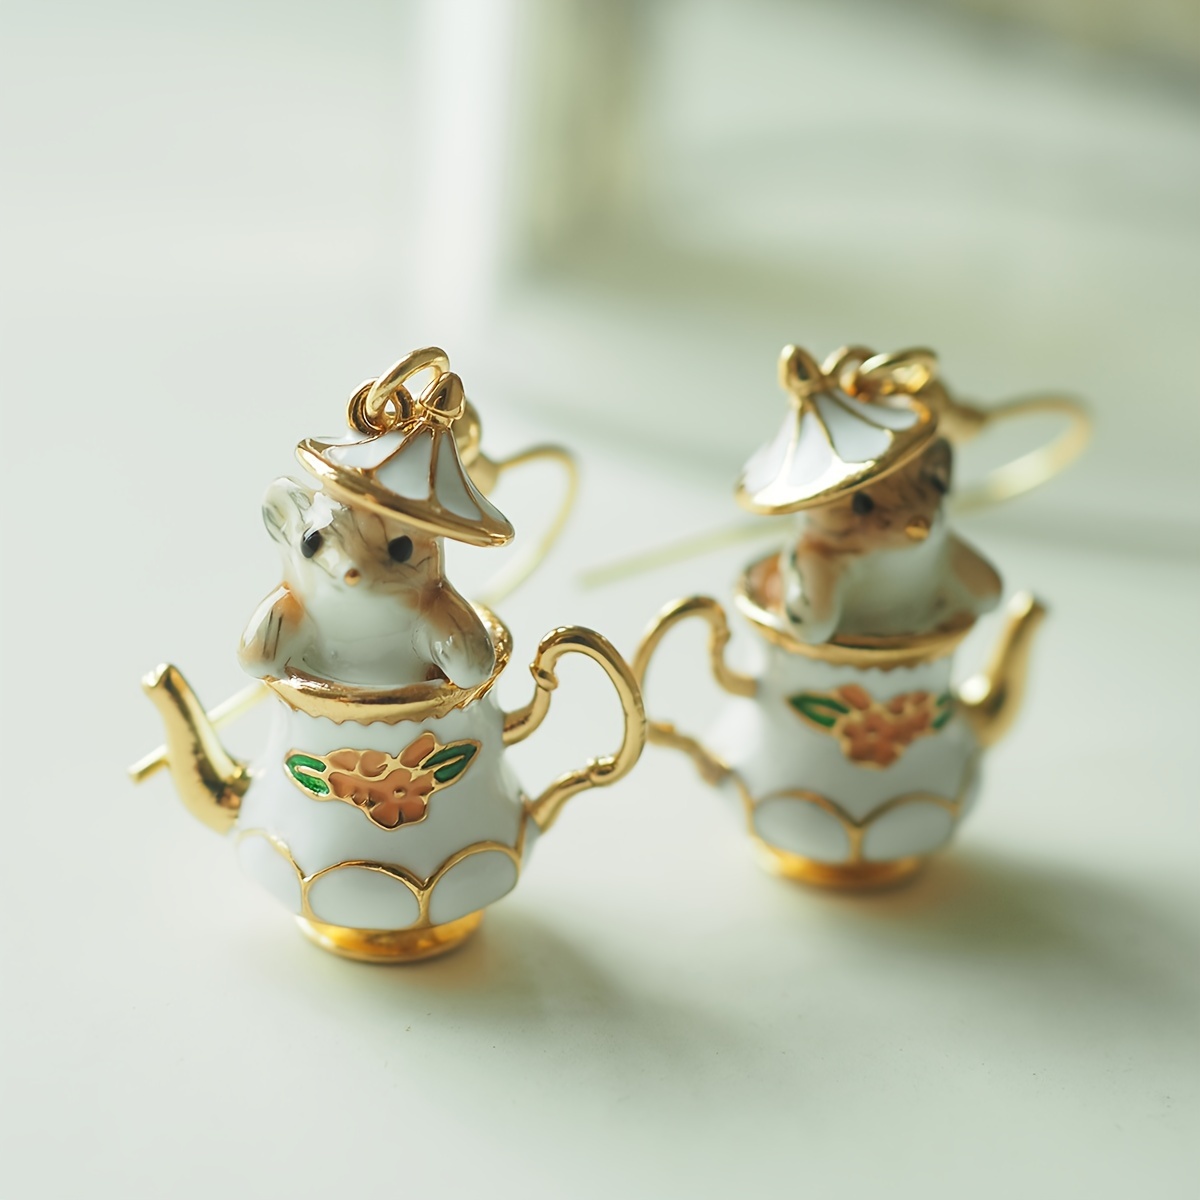 

1 Pair Handmade Enamel Glazed Teapot Squirrel Earrings, Cute Teacup Mouse Design, Unique Colorful Pattern Drops, Fashion Jewelry Accessory